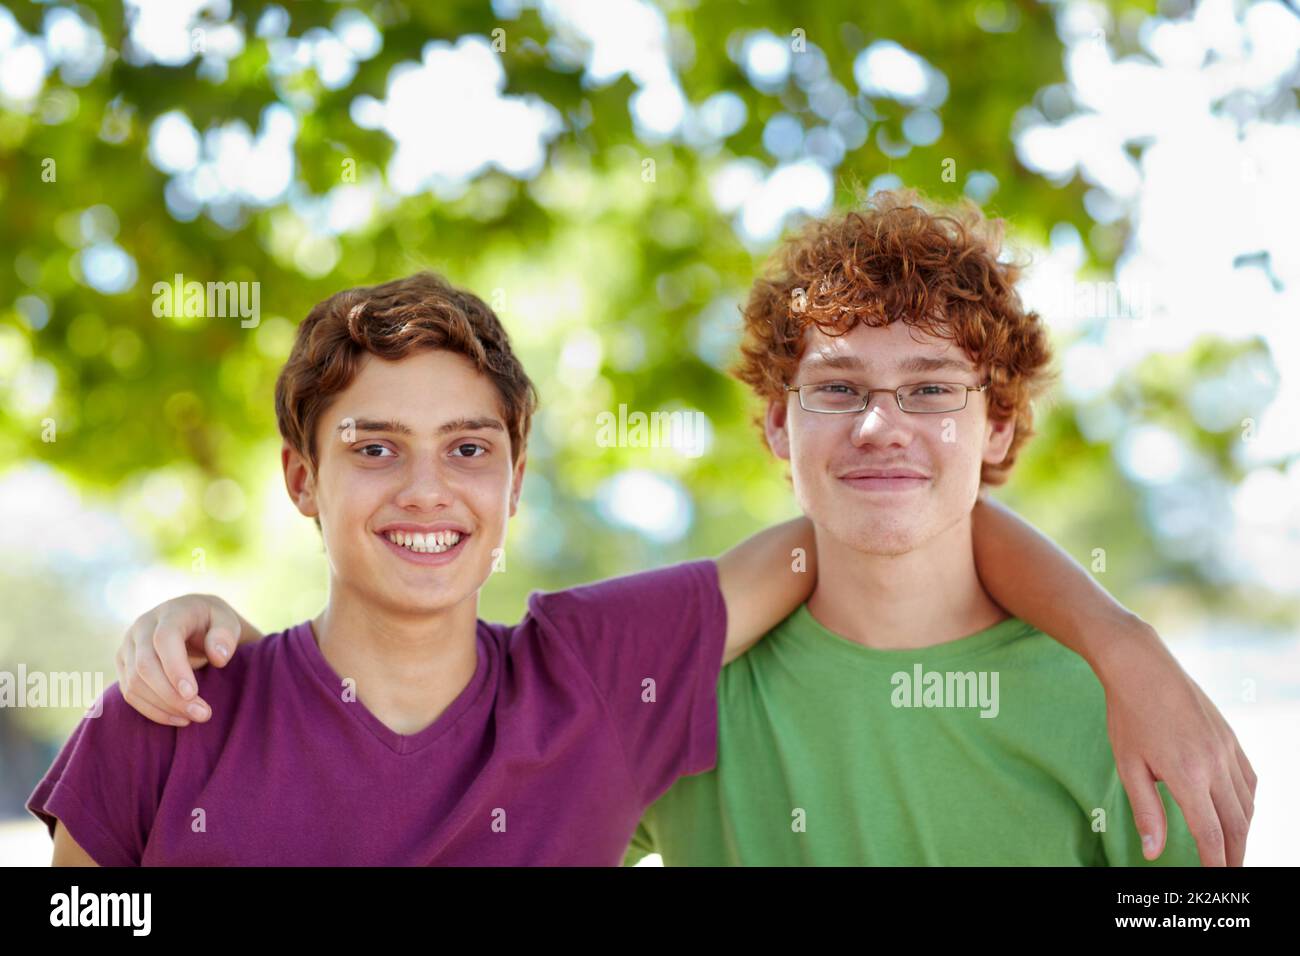 Best buds forever. Portrait of two boys in a friendly embrace. Stock Photo